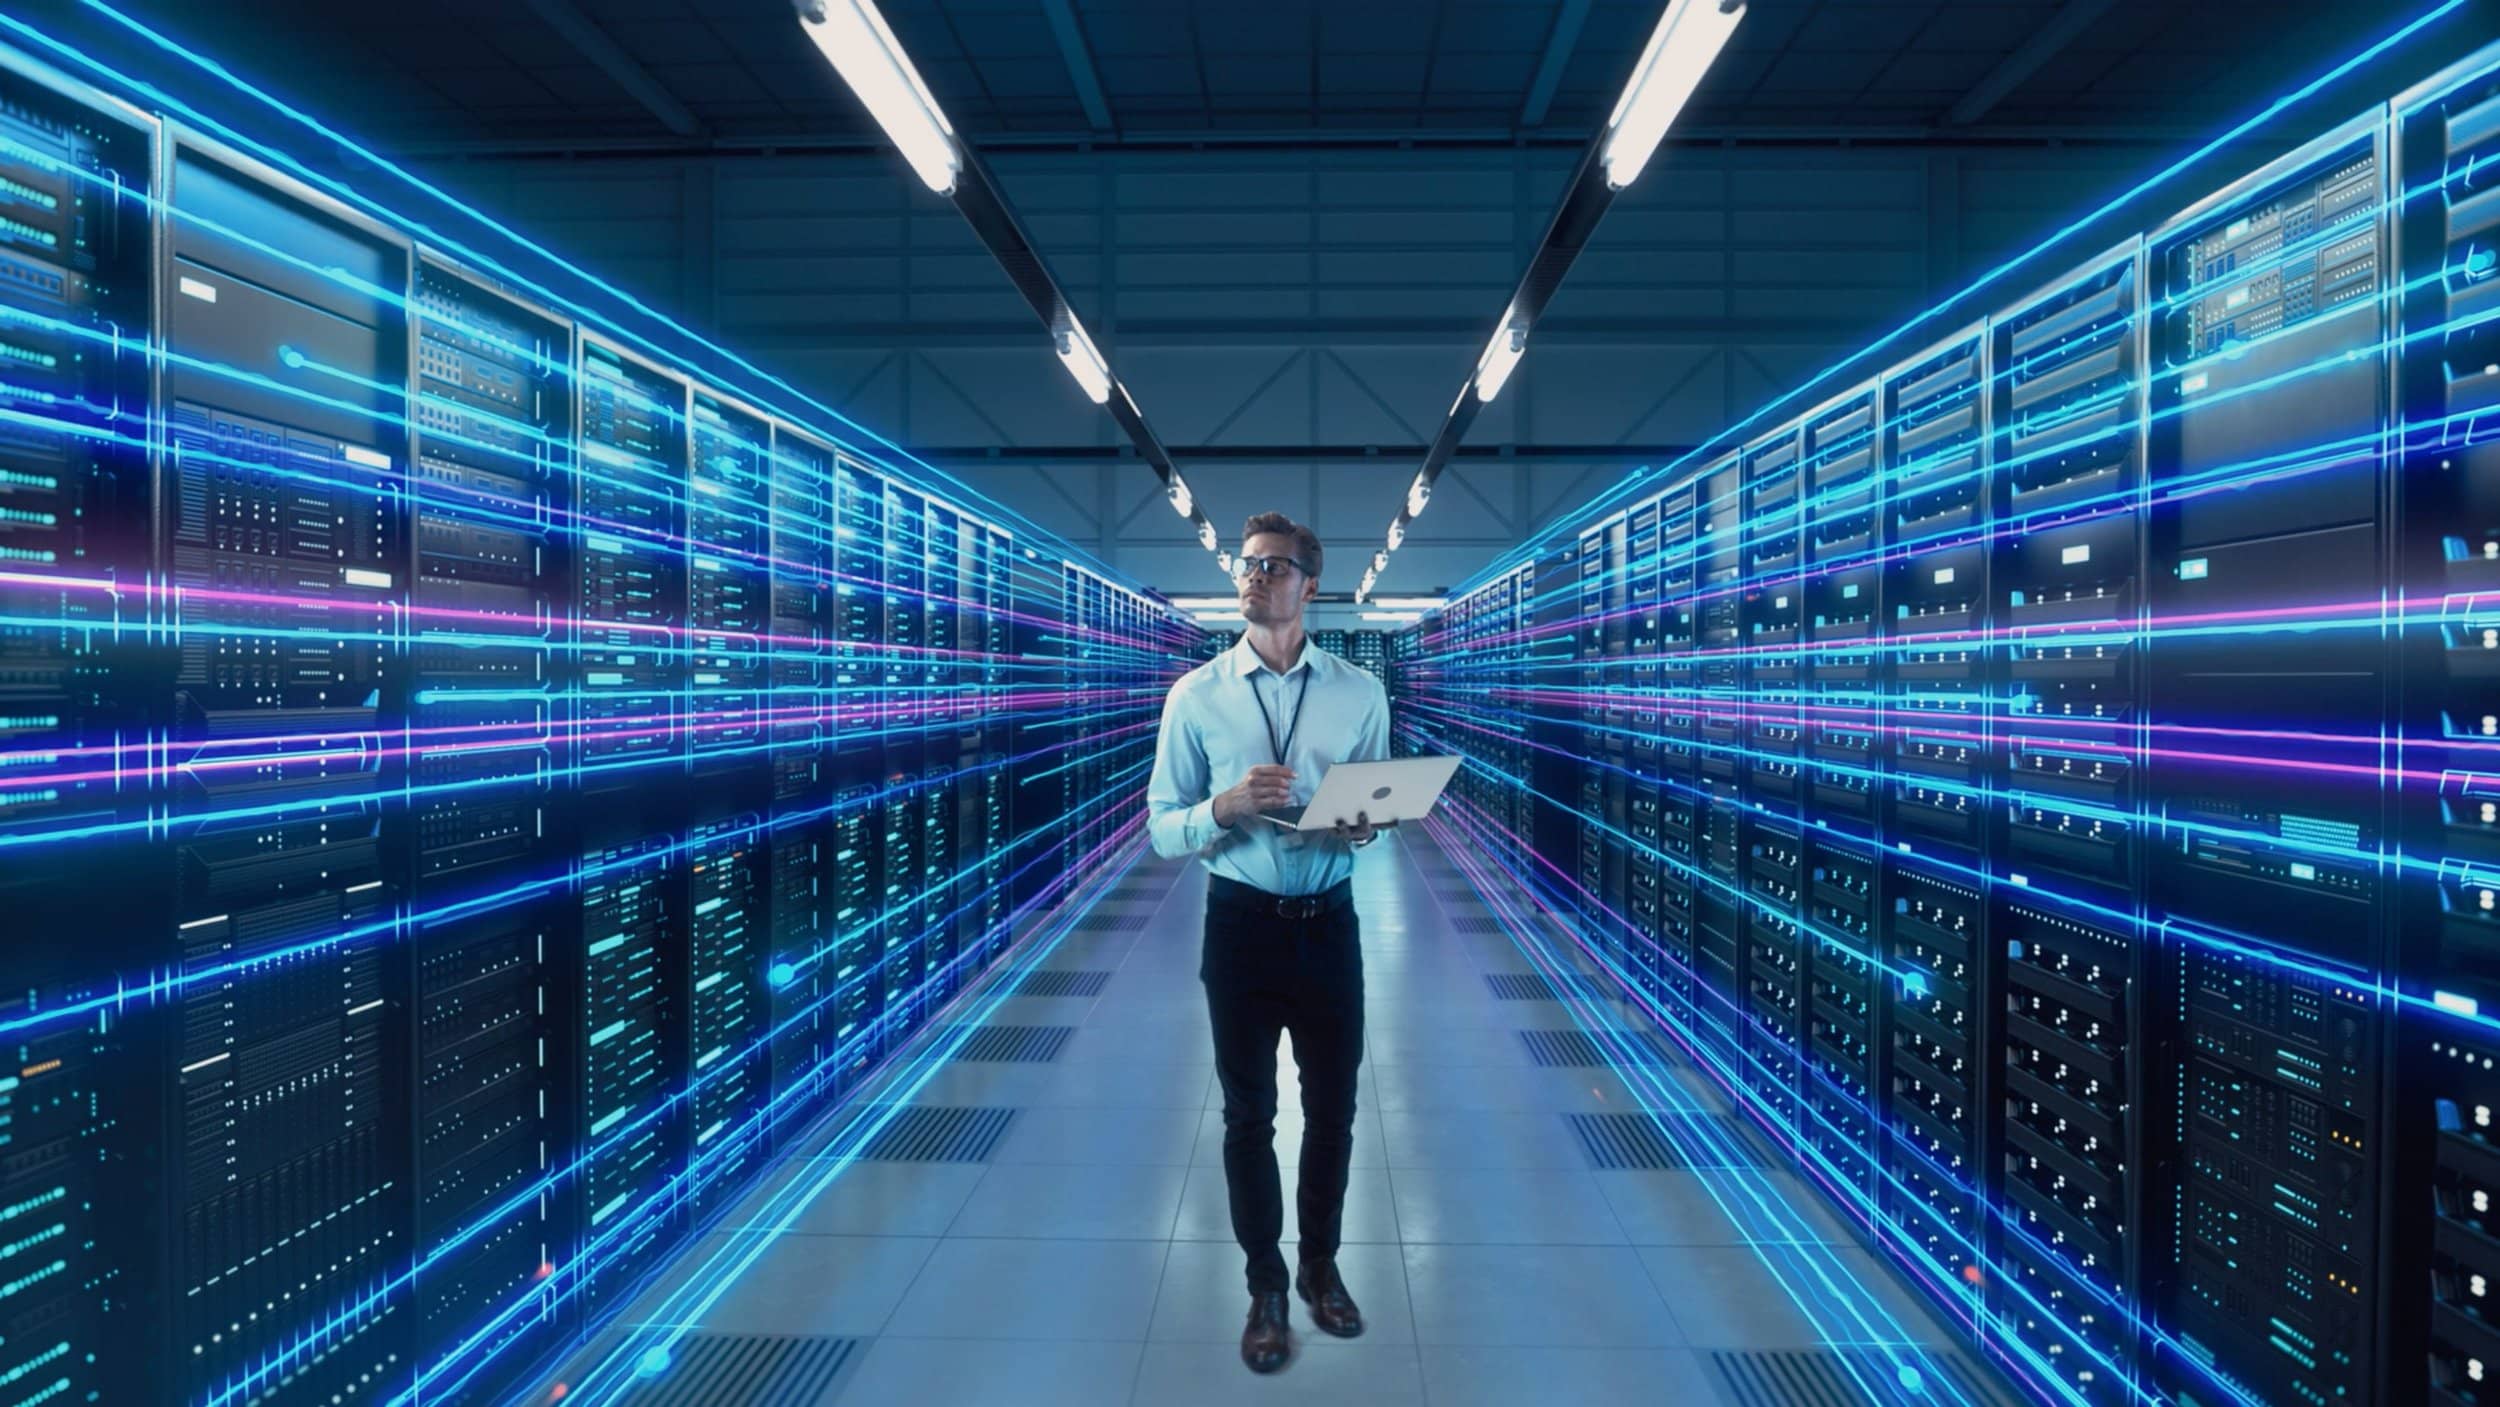 IT professional standing in a data center with rows of servers and glowing lights, representing the performance optimization services offered by Fast Fixx to ensure cloud resources are performing optimally and maximizing efficiency